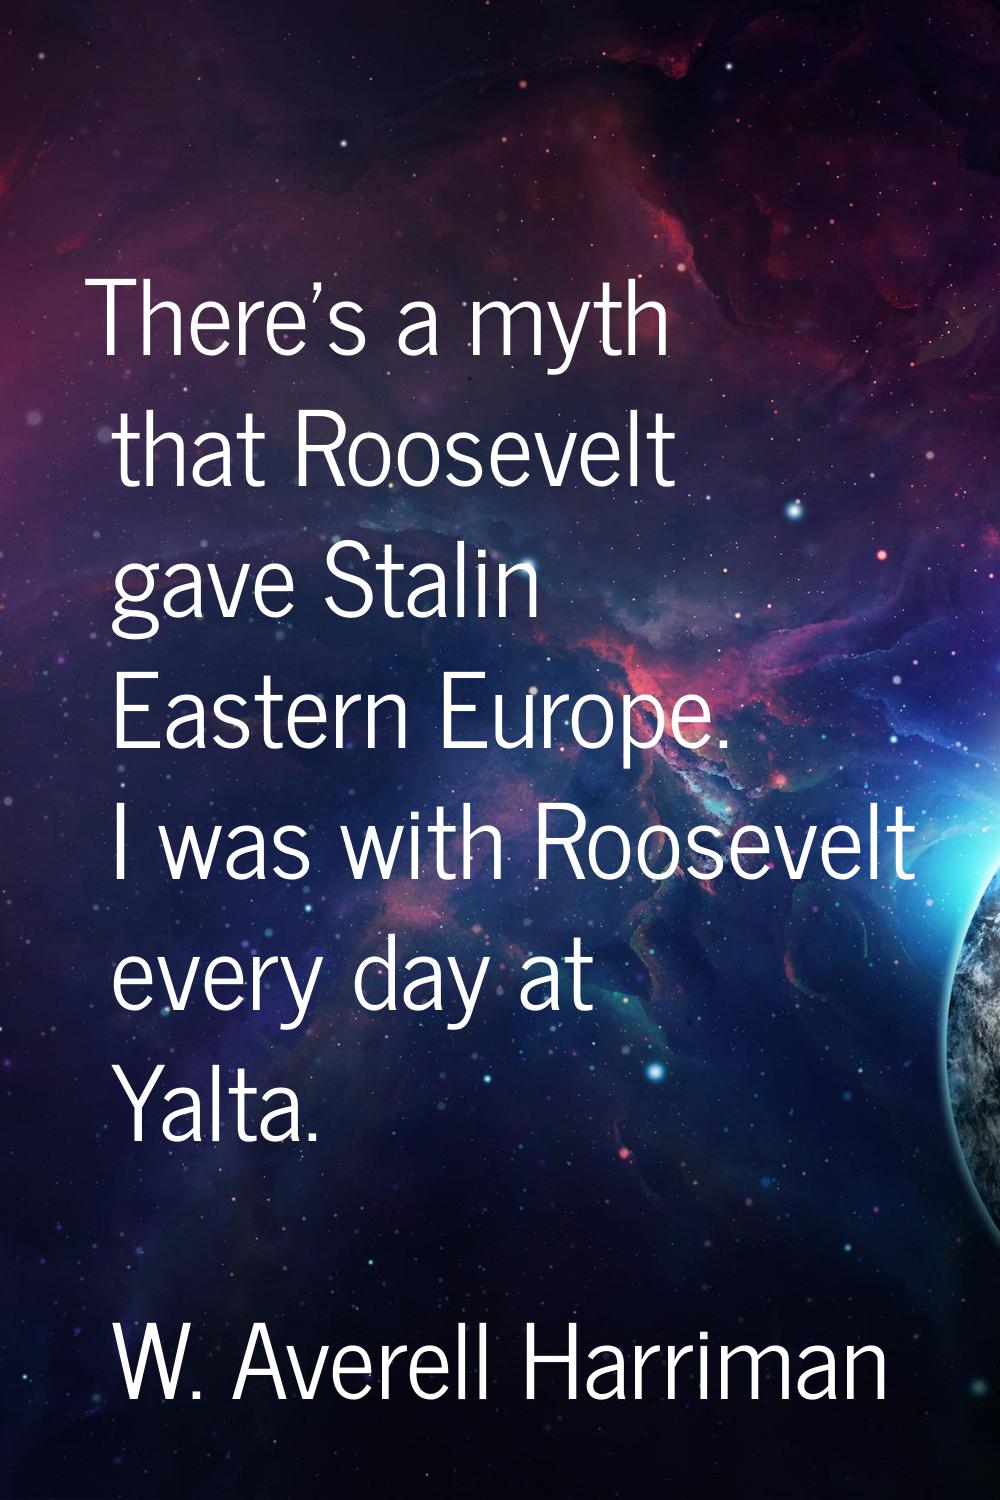 There's a myth that Roosevelt gave Stalin Eastern Europe. I was with Roosevelt every day at Yalta.